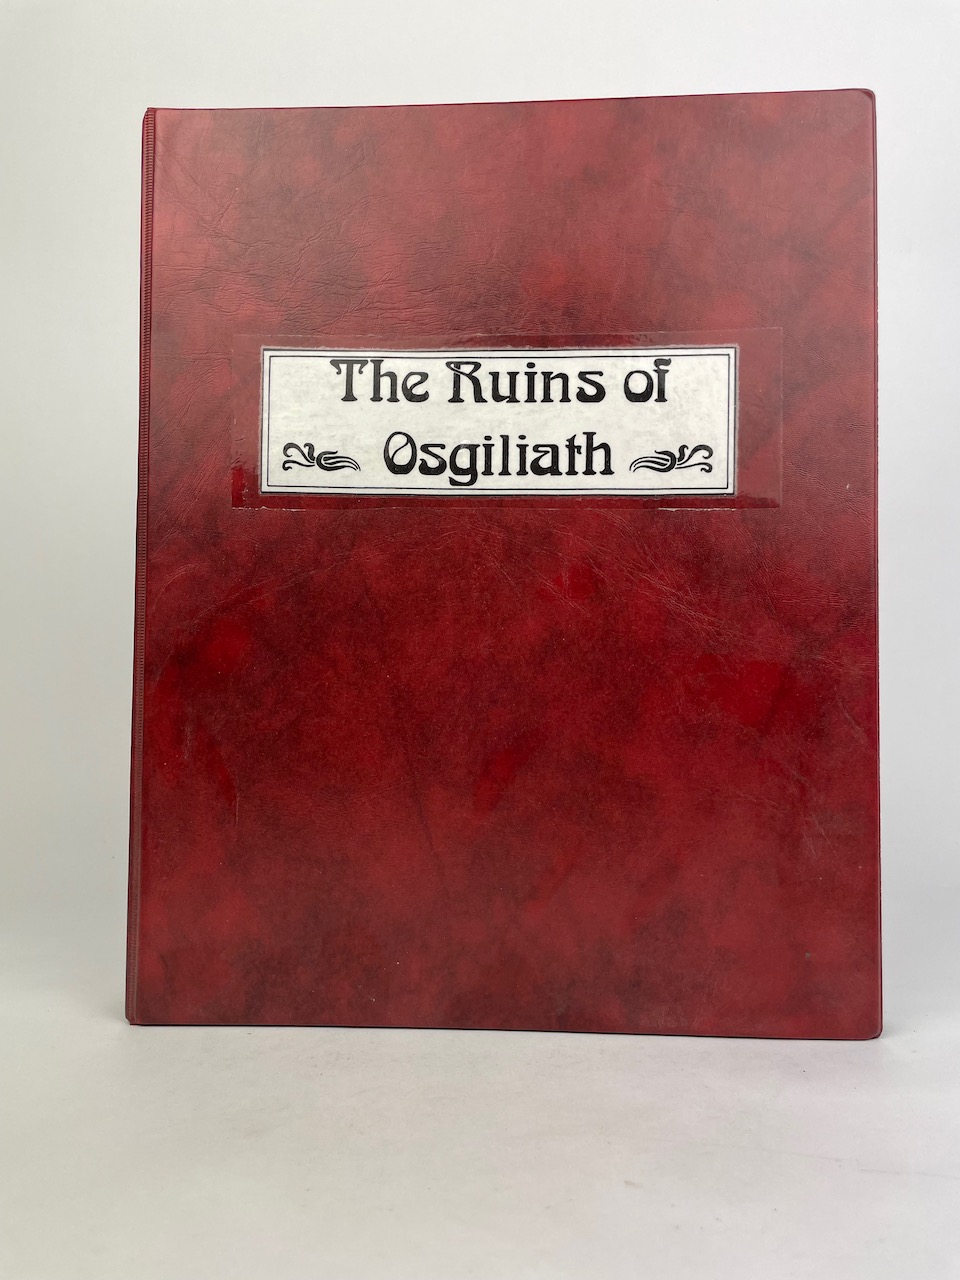 The Complete Ruins of Osgiliath, Signed Limited Numbered Edition, nr 9 of 12 1